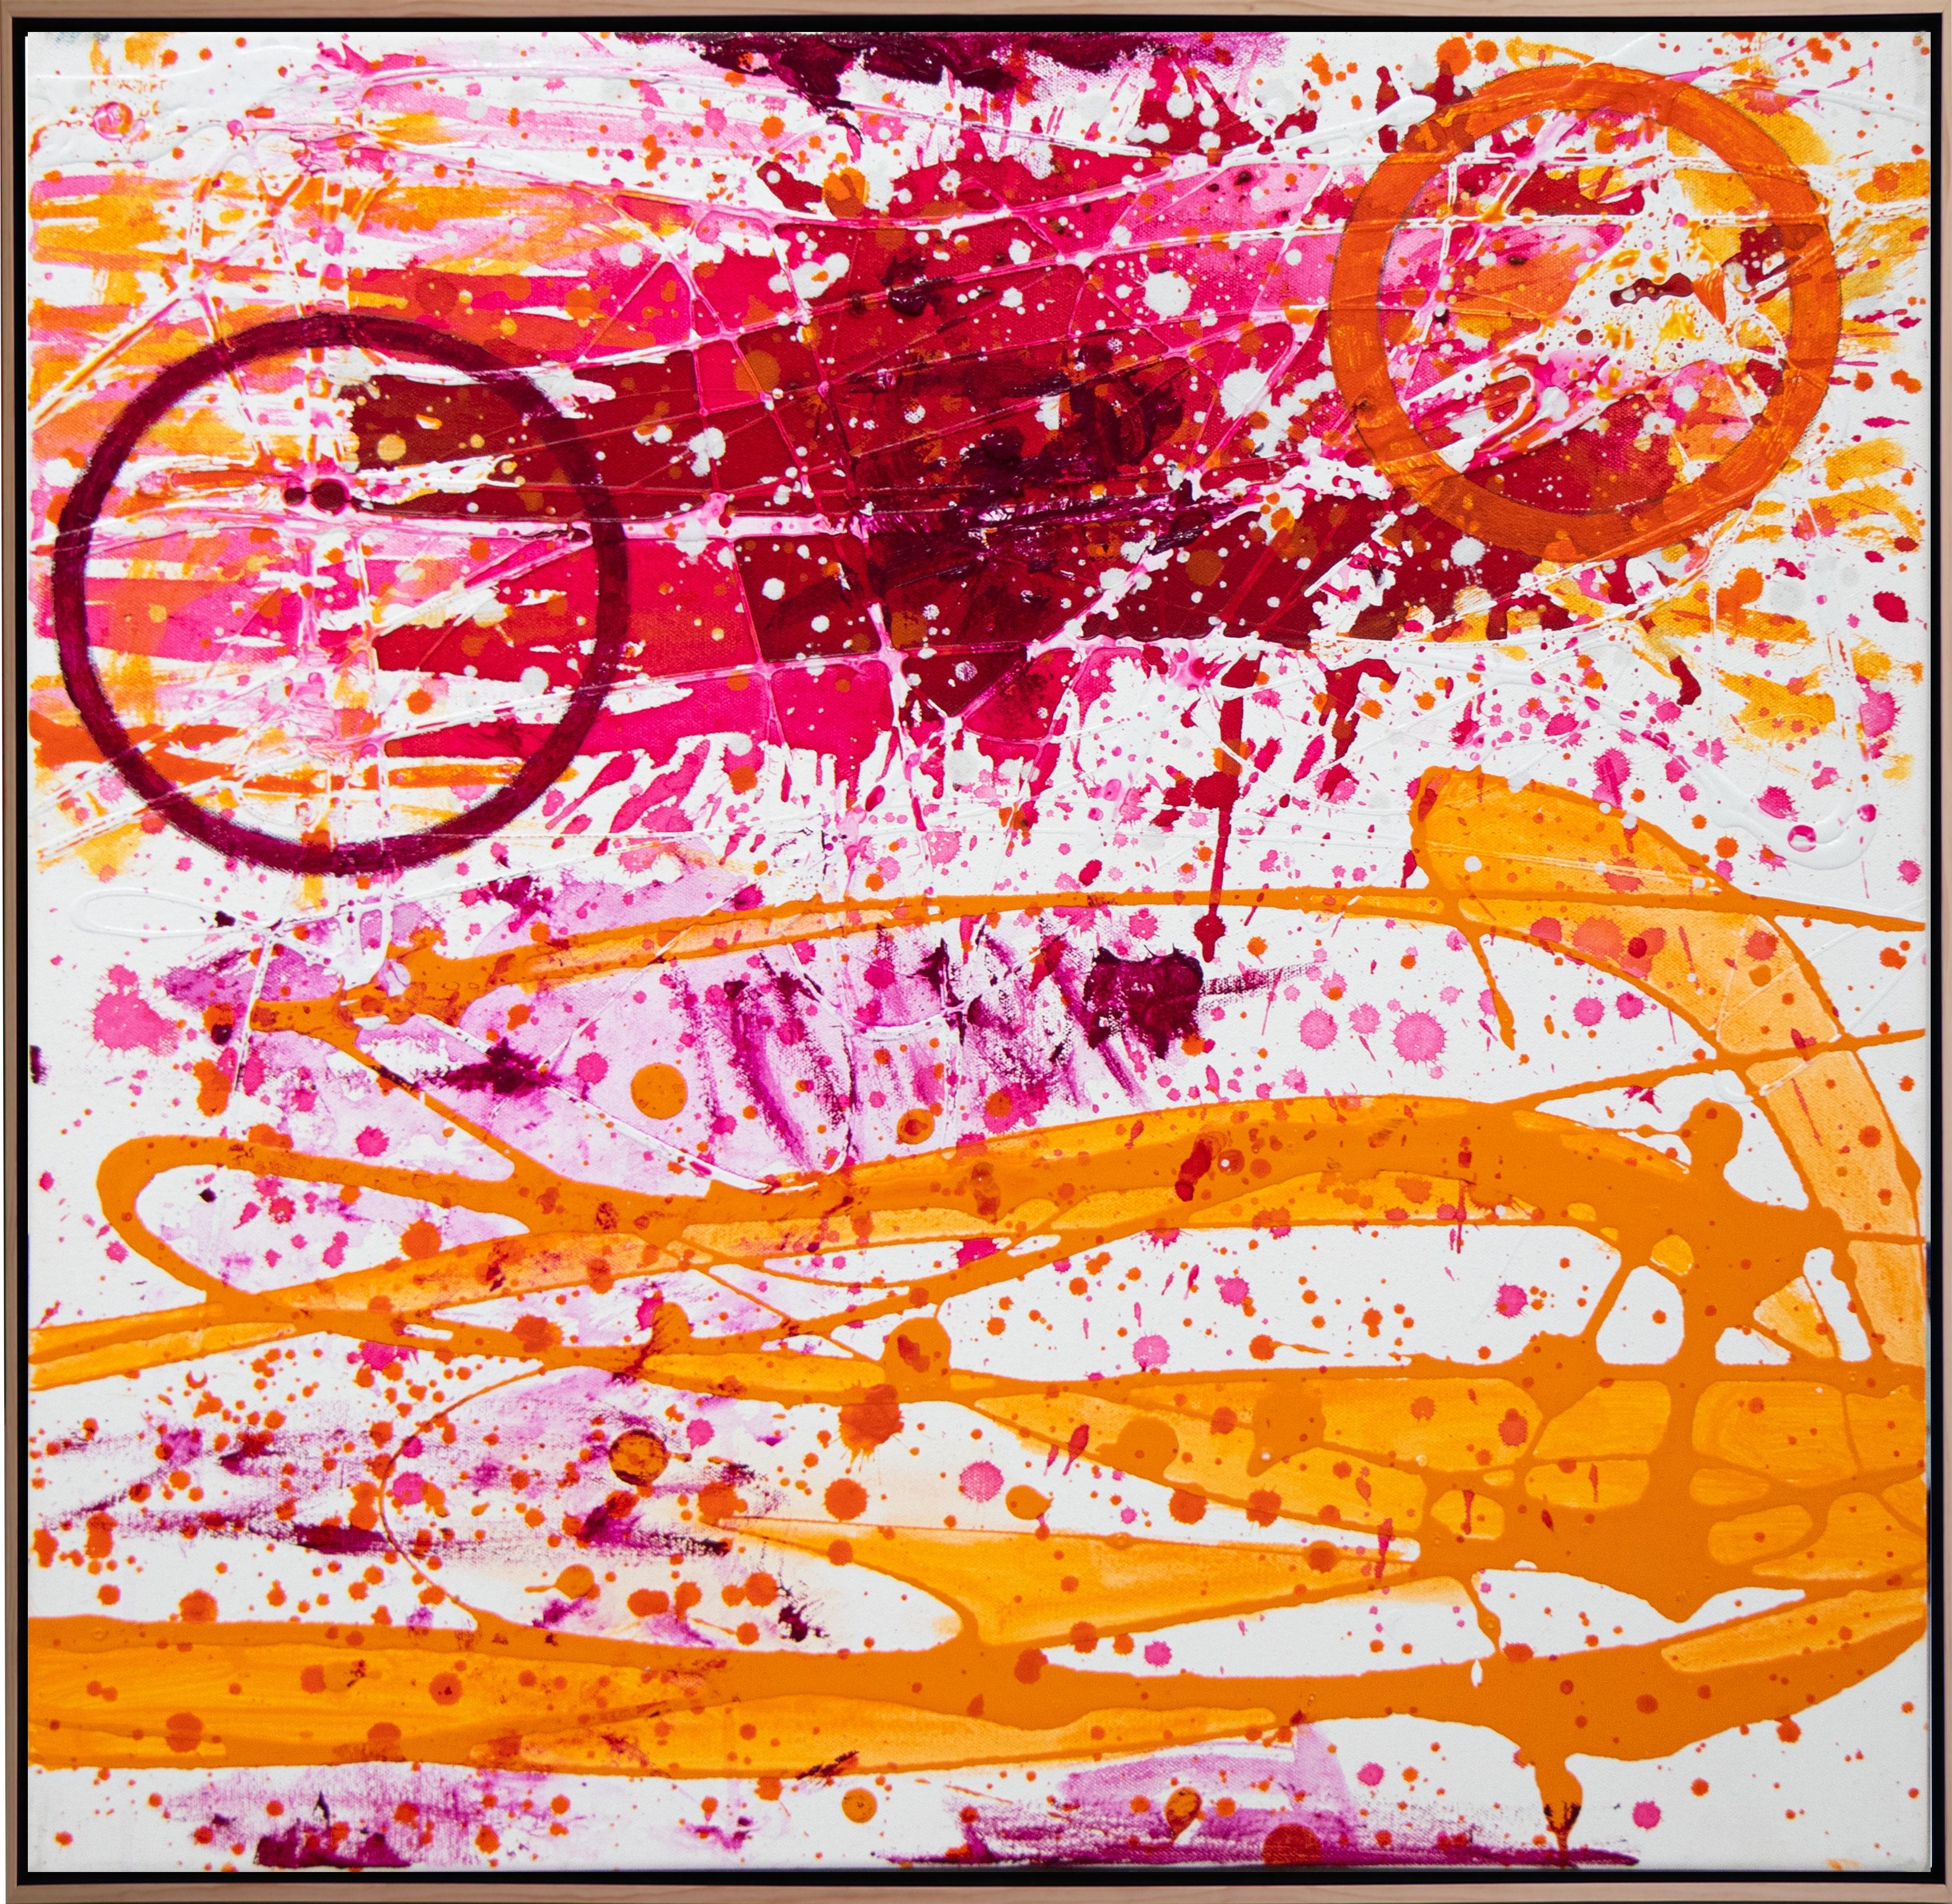 J. Steven Manolis Abstract Painting - "Pink and Orange Flamingo, " Florida Contemporary Abstract Expressionist Artist